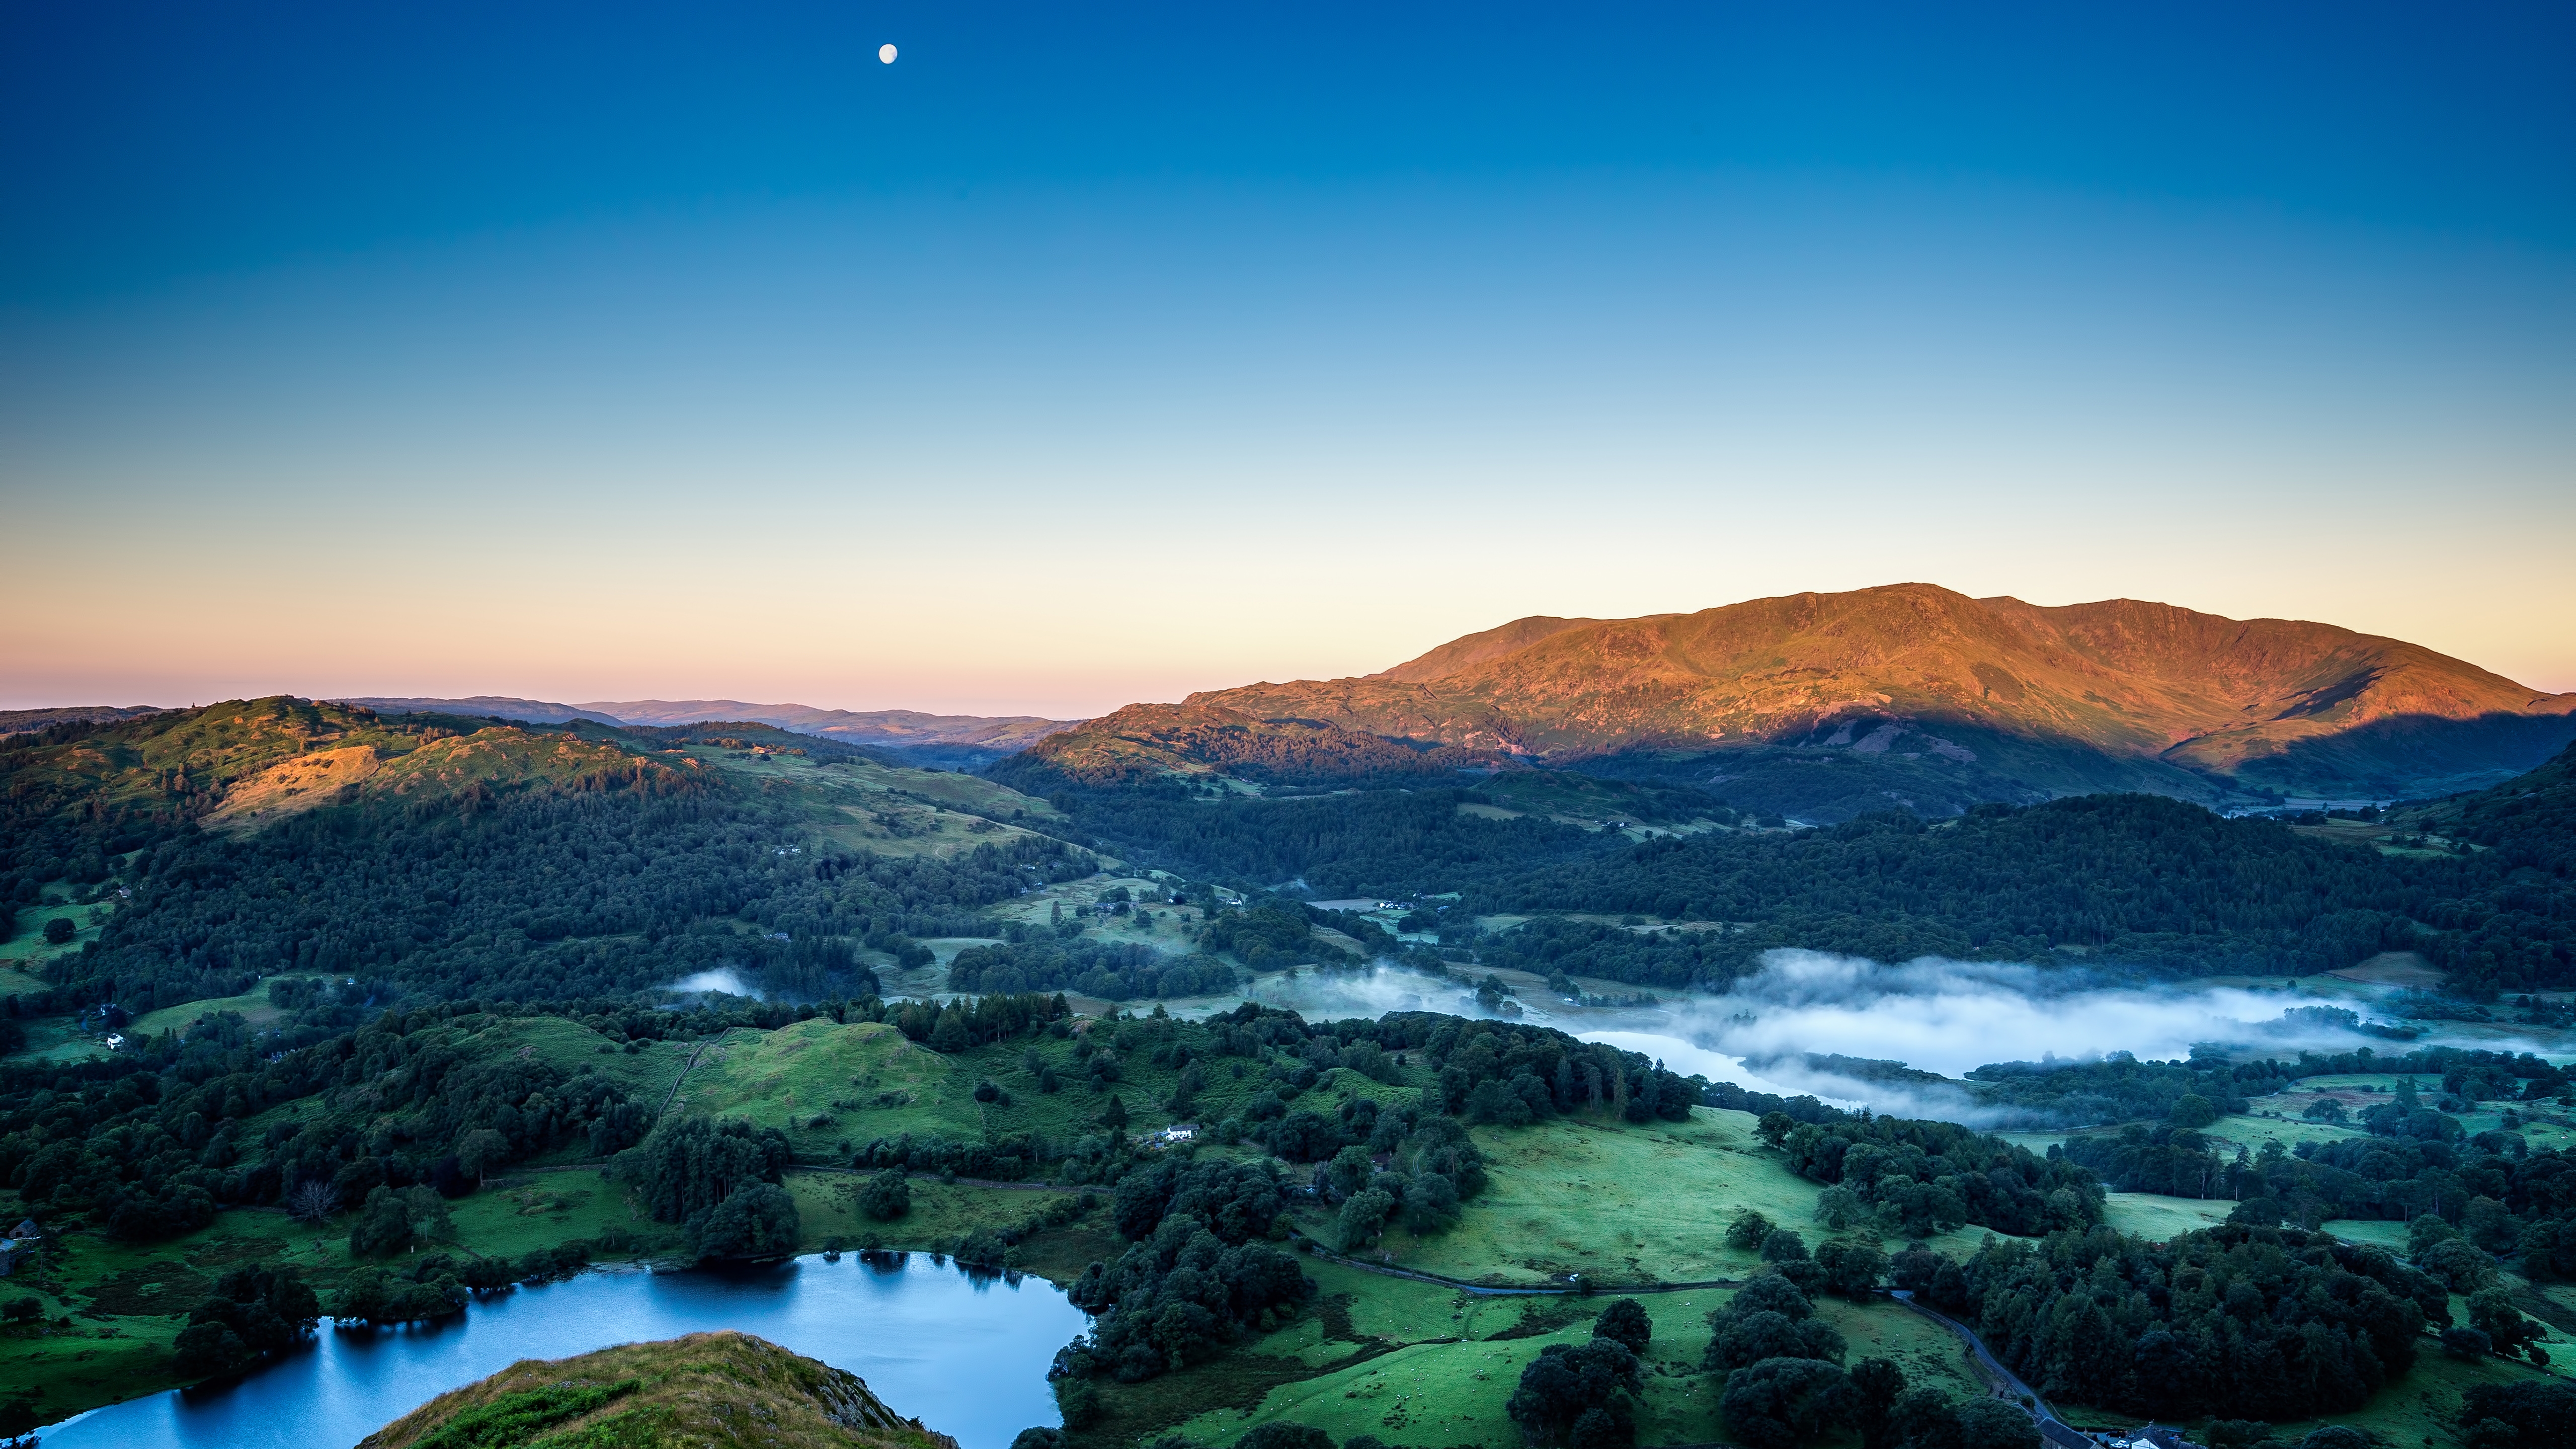 Wallpapers landscapes loughrigg fell wallpaper england on the desktop